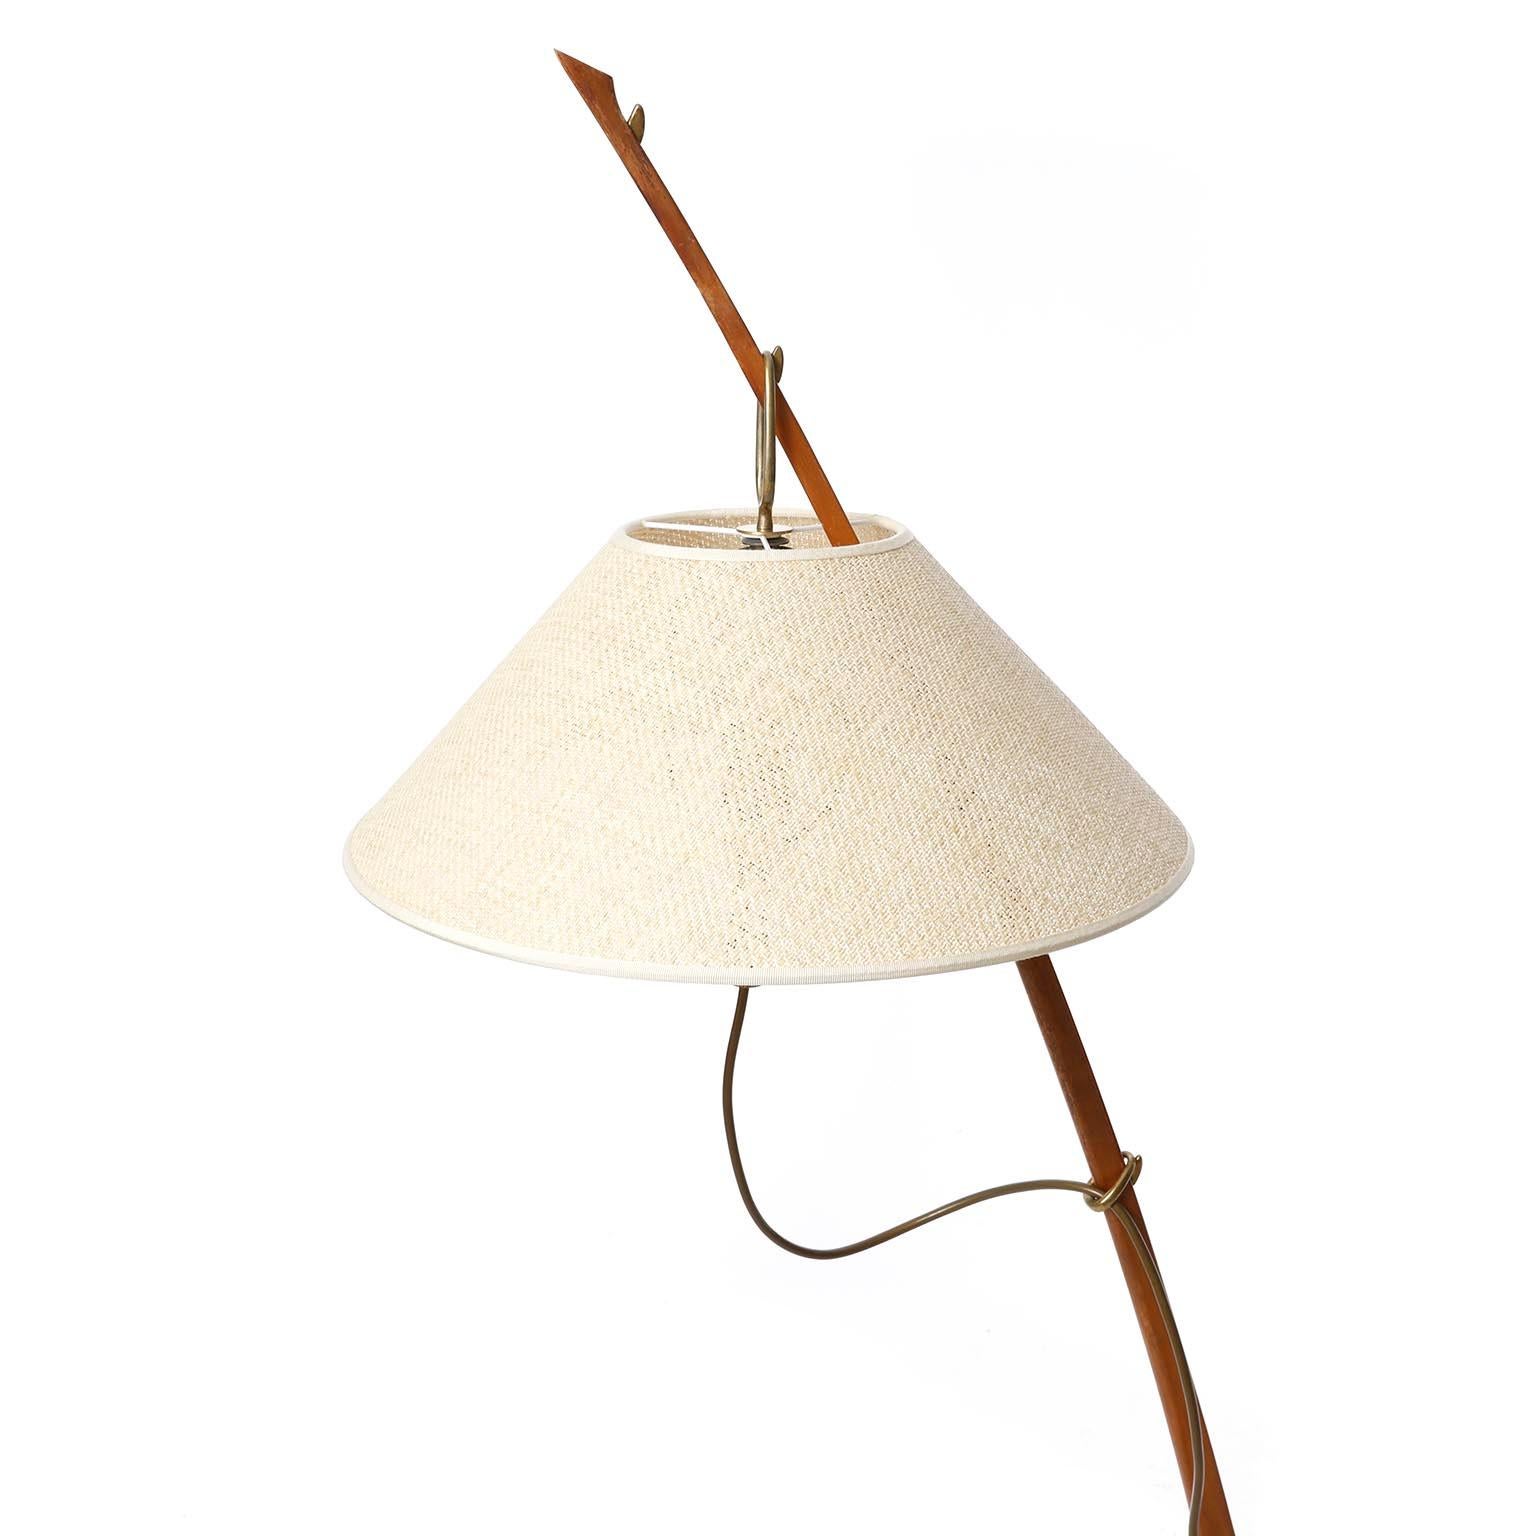 Floor Lamp 'Dornstab' No. 2076 by J.T. Kalmar, Patinated Brass Wood Cane, 1960 For Sale 1